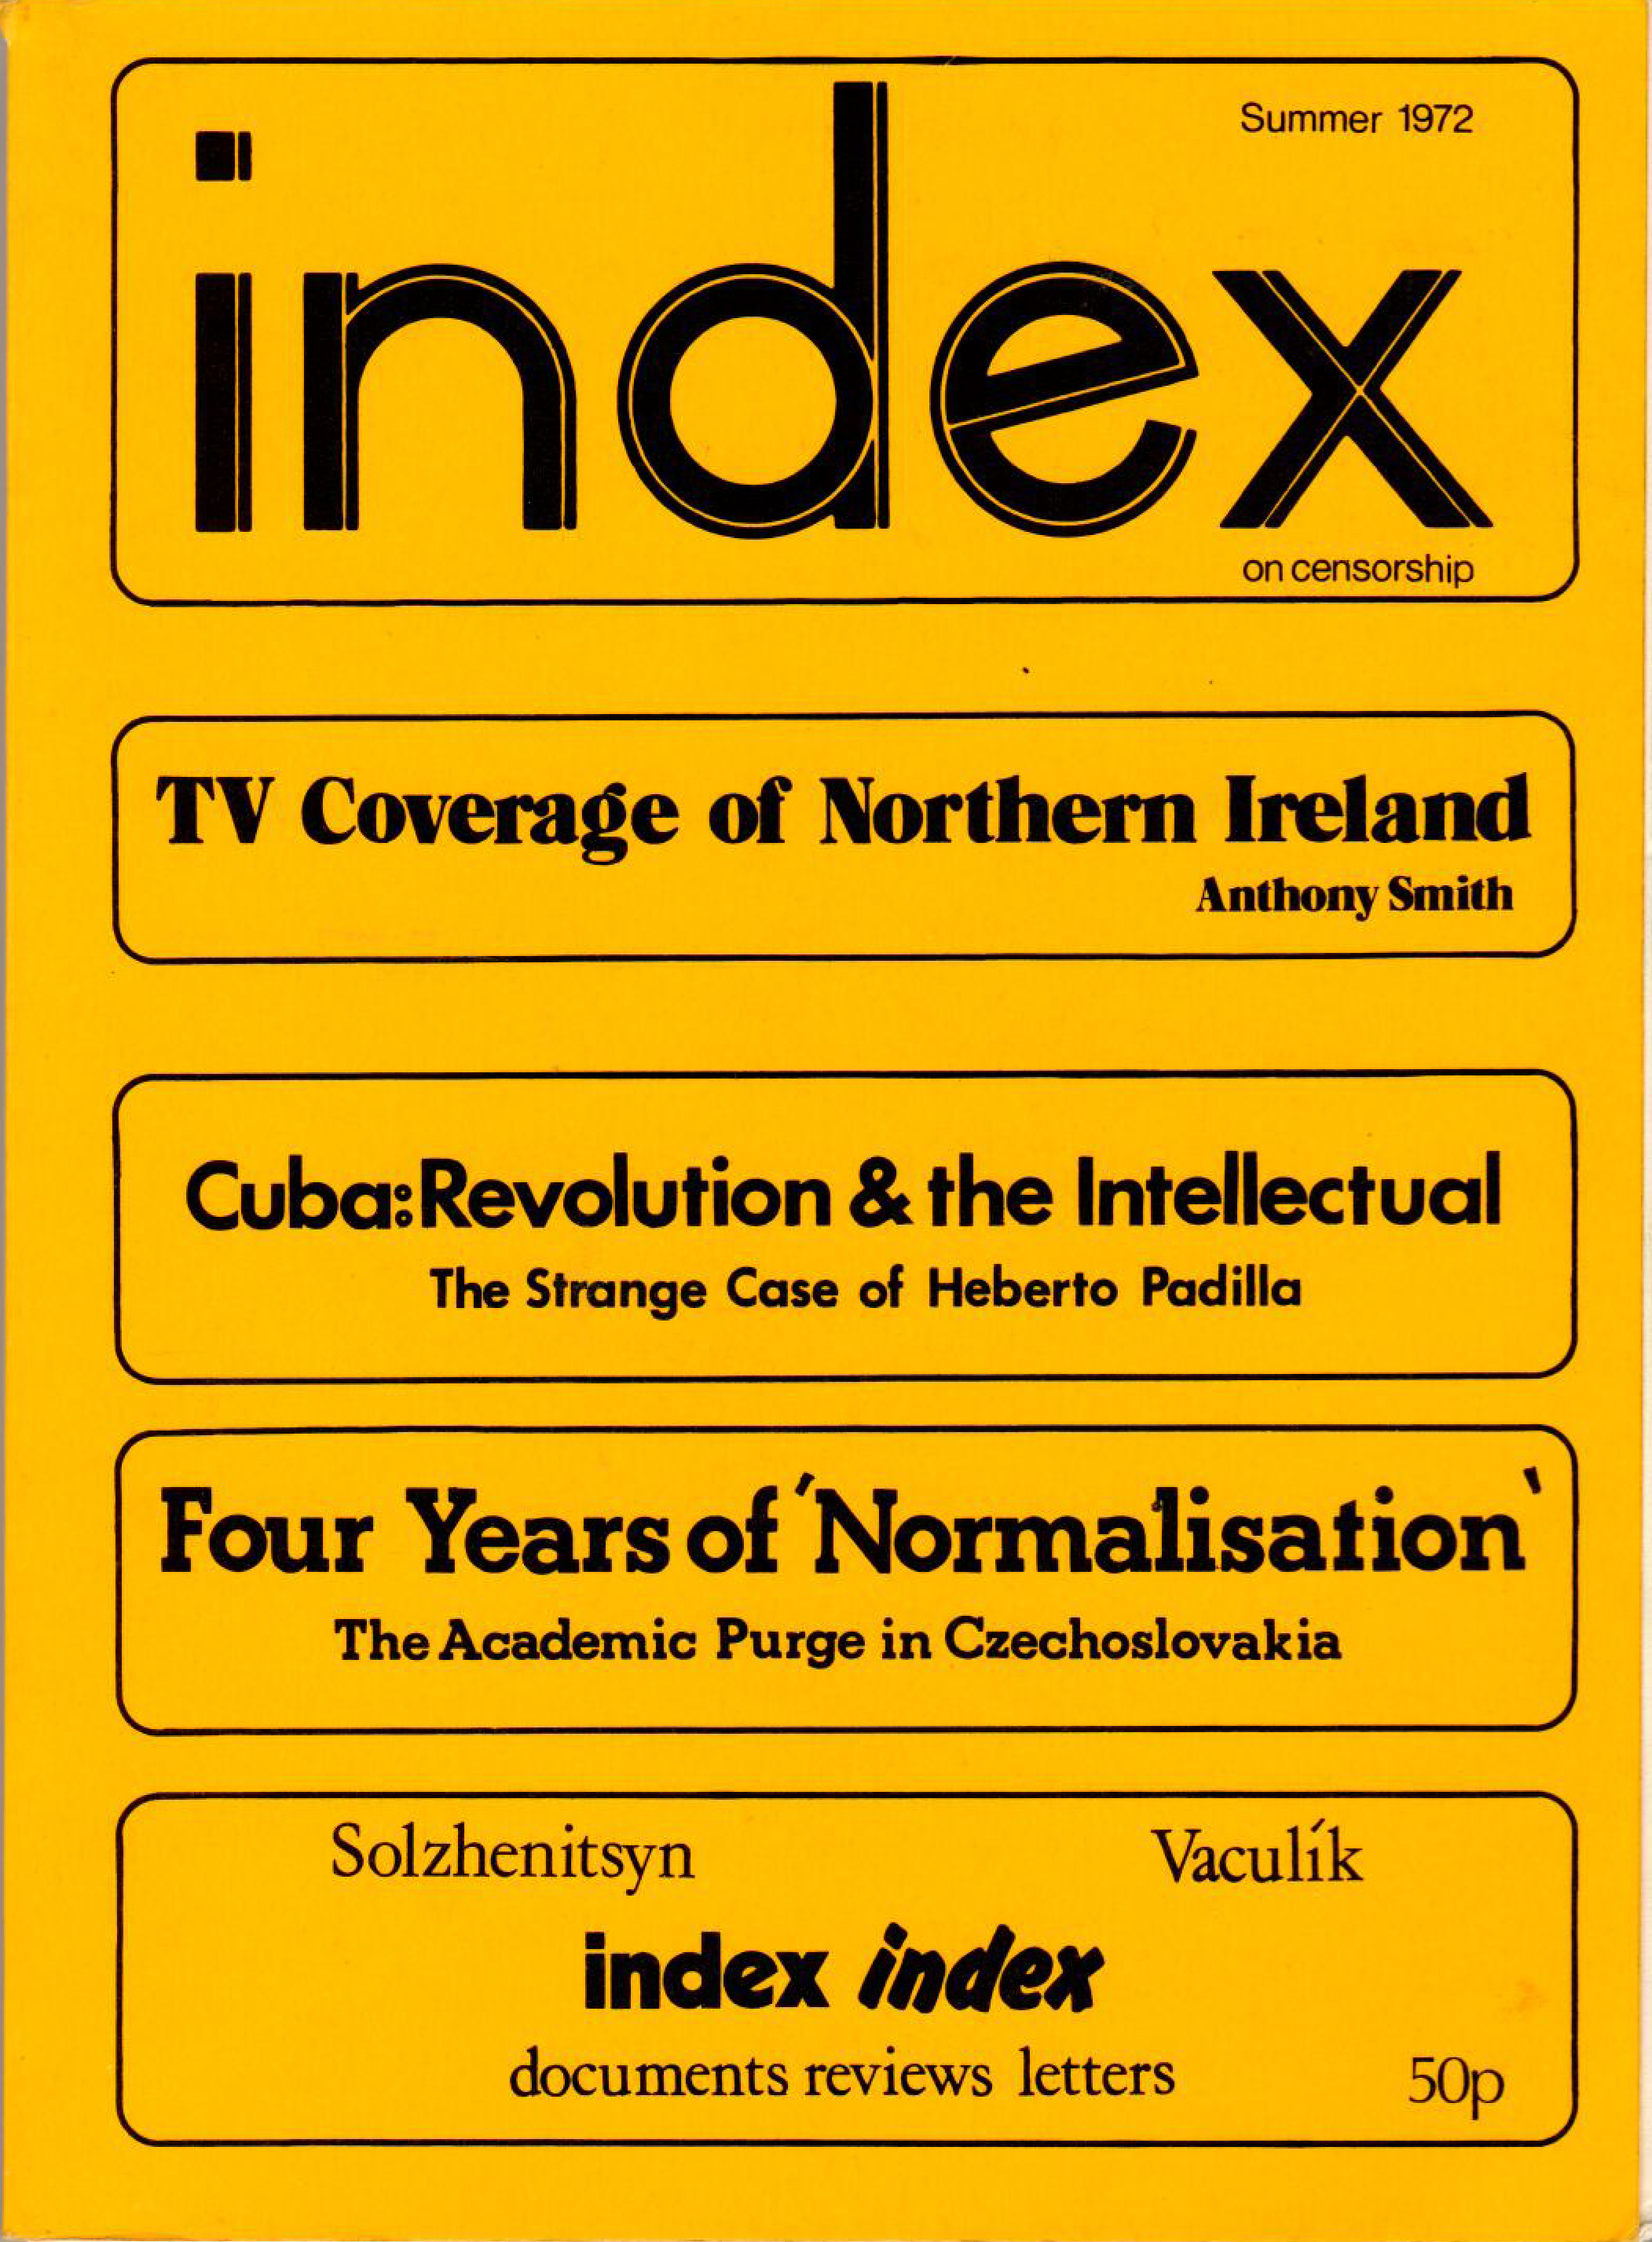 TV coverage of Northern Ireland, the Summer 1972 issue of Index on Censorship magazine